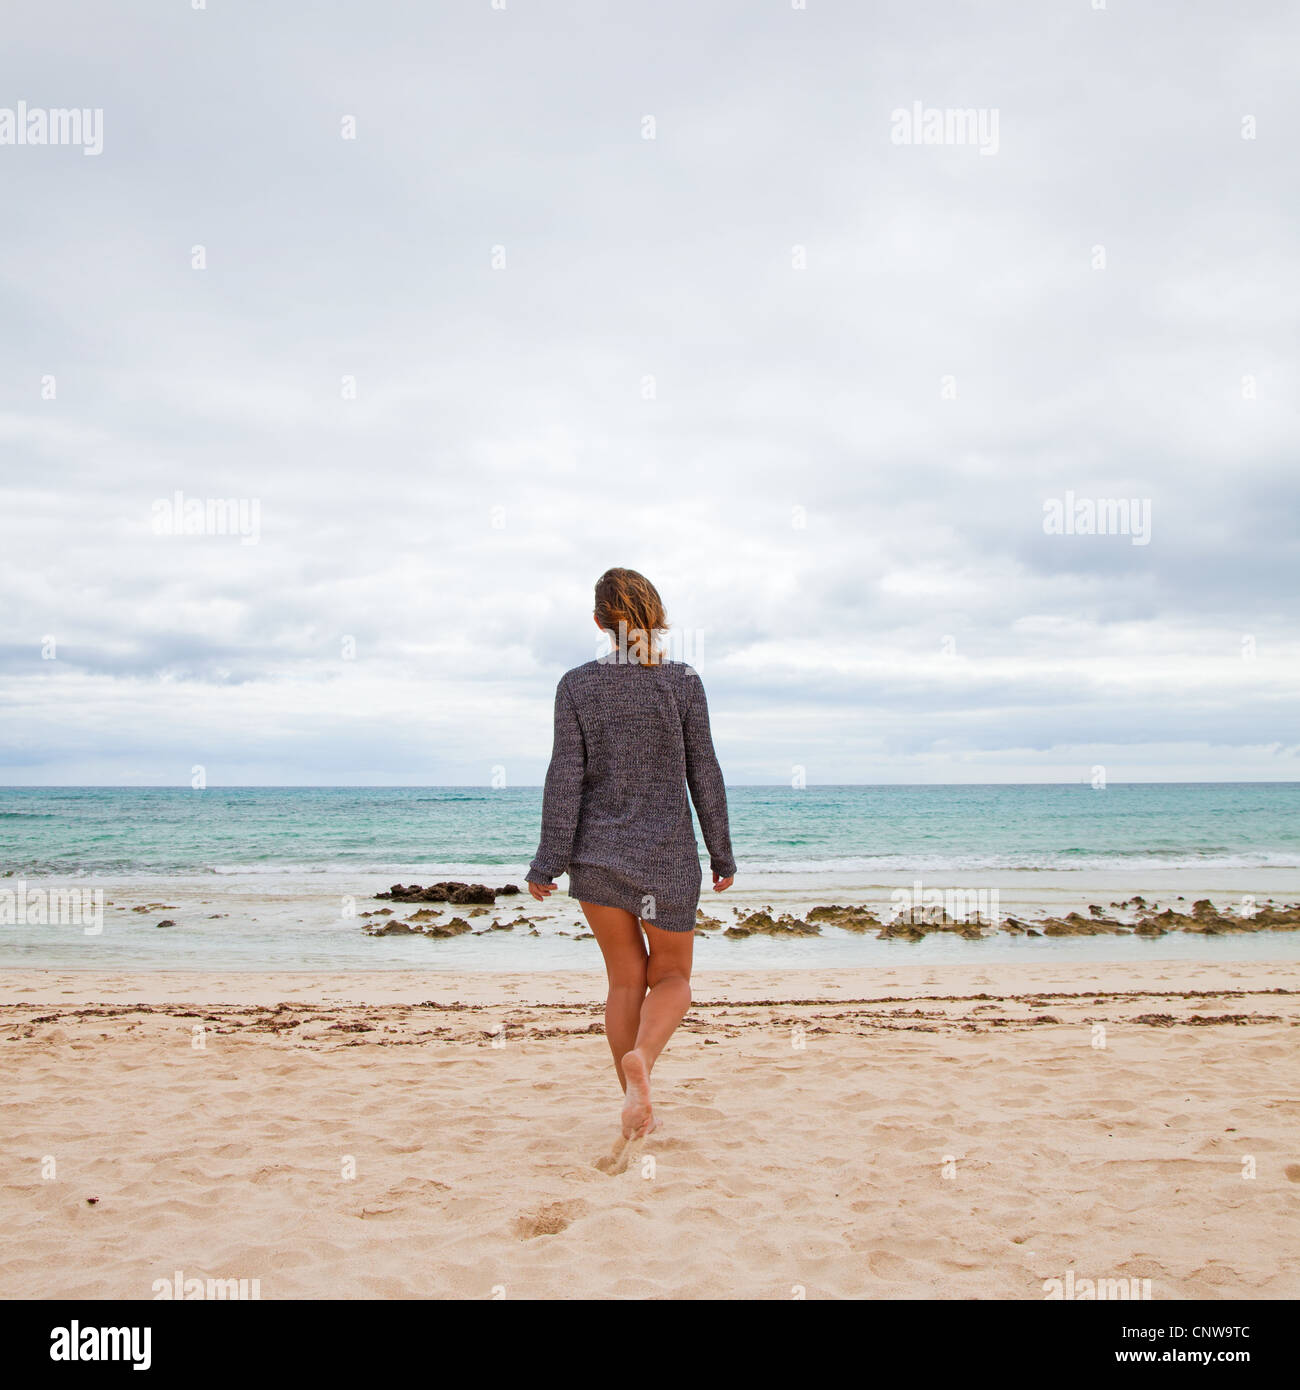 maybe no swimming today - tanned, middle-age woman walks towards the ocean, overcast day Stock Photo